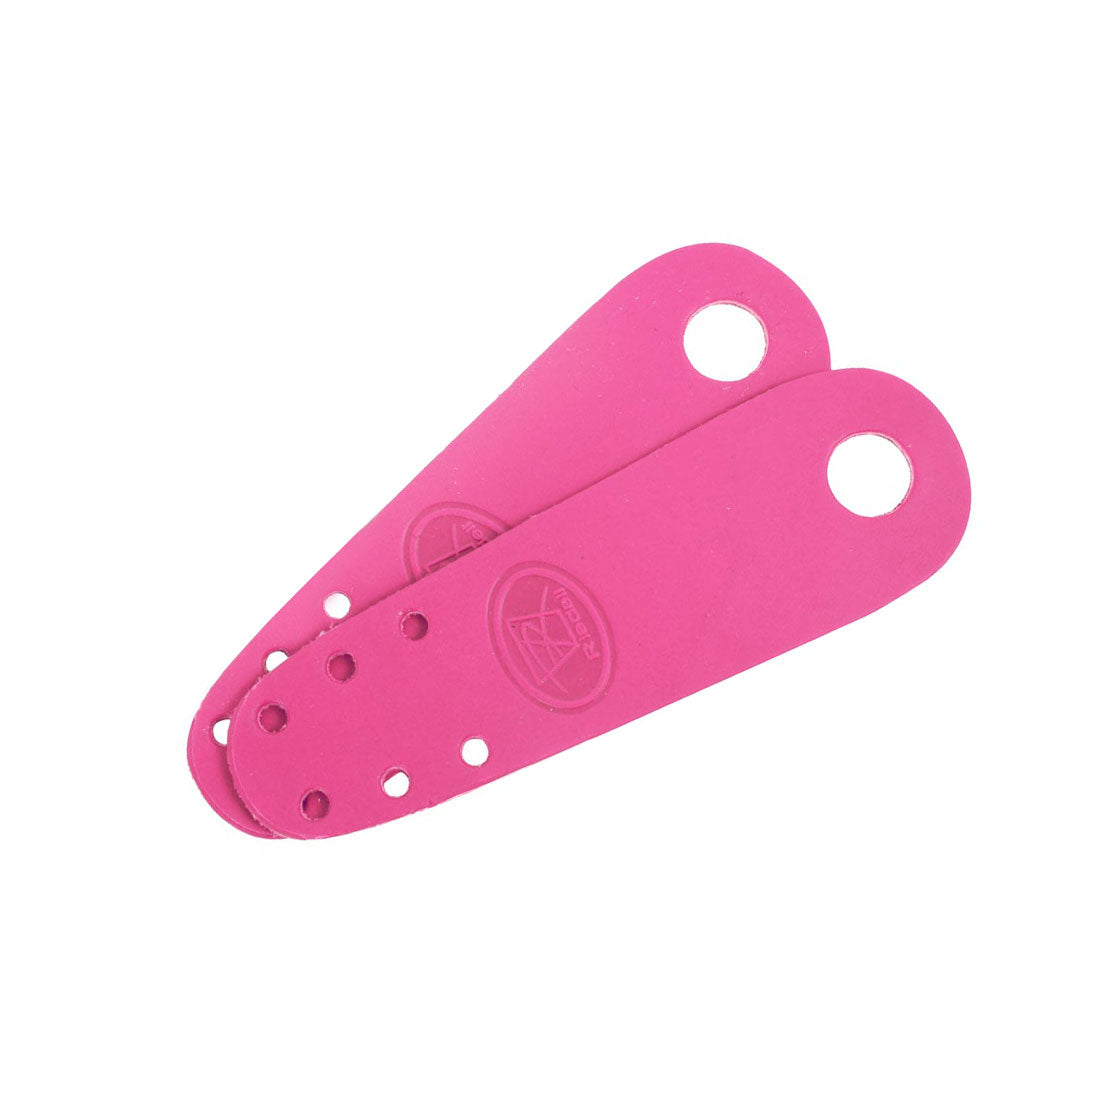 Riedell Flat Toe Guards 2pk - Leather Pink Roller Skate Hardware and Parts